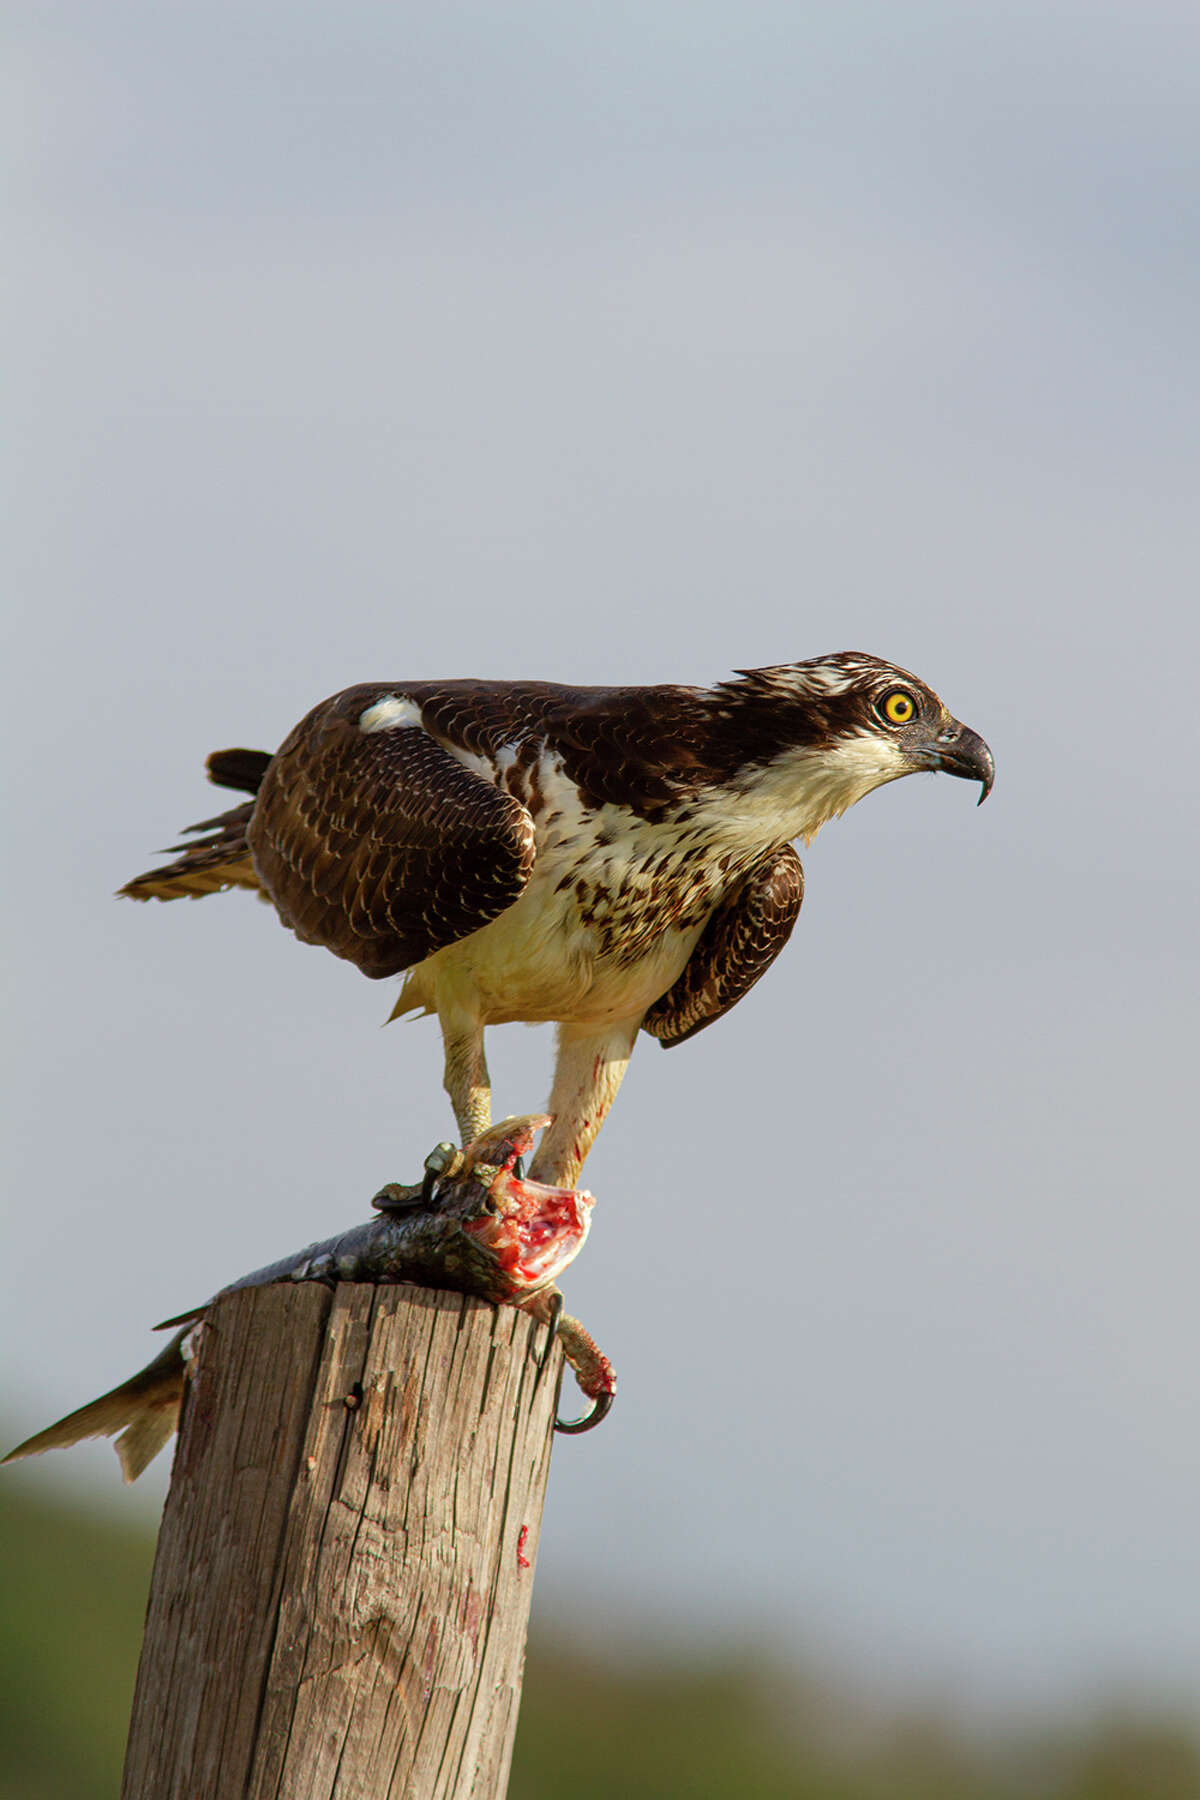 Osprey are a fish-eating bird. They will eat the head of the bird first. Photo Credit: Kathy Adams Clark. Restricted use.